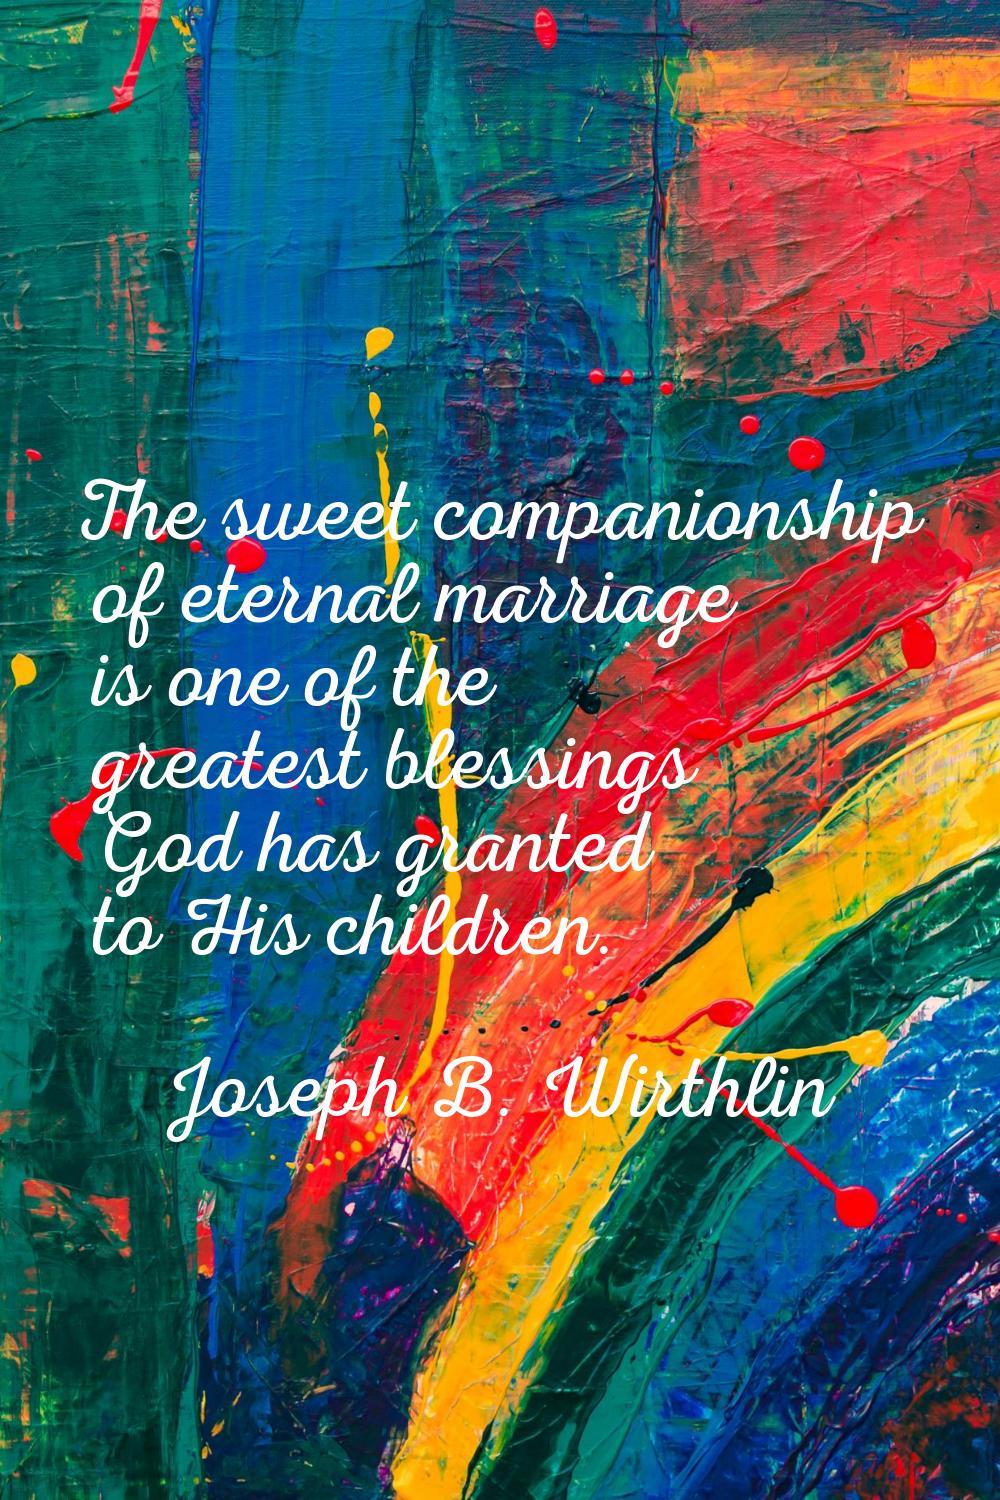 The sweet companionship of eternal marriage is one of the greatest blessings God has granted to His